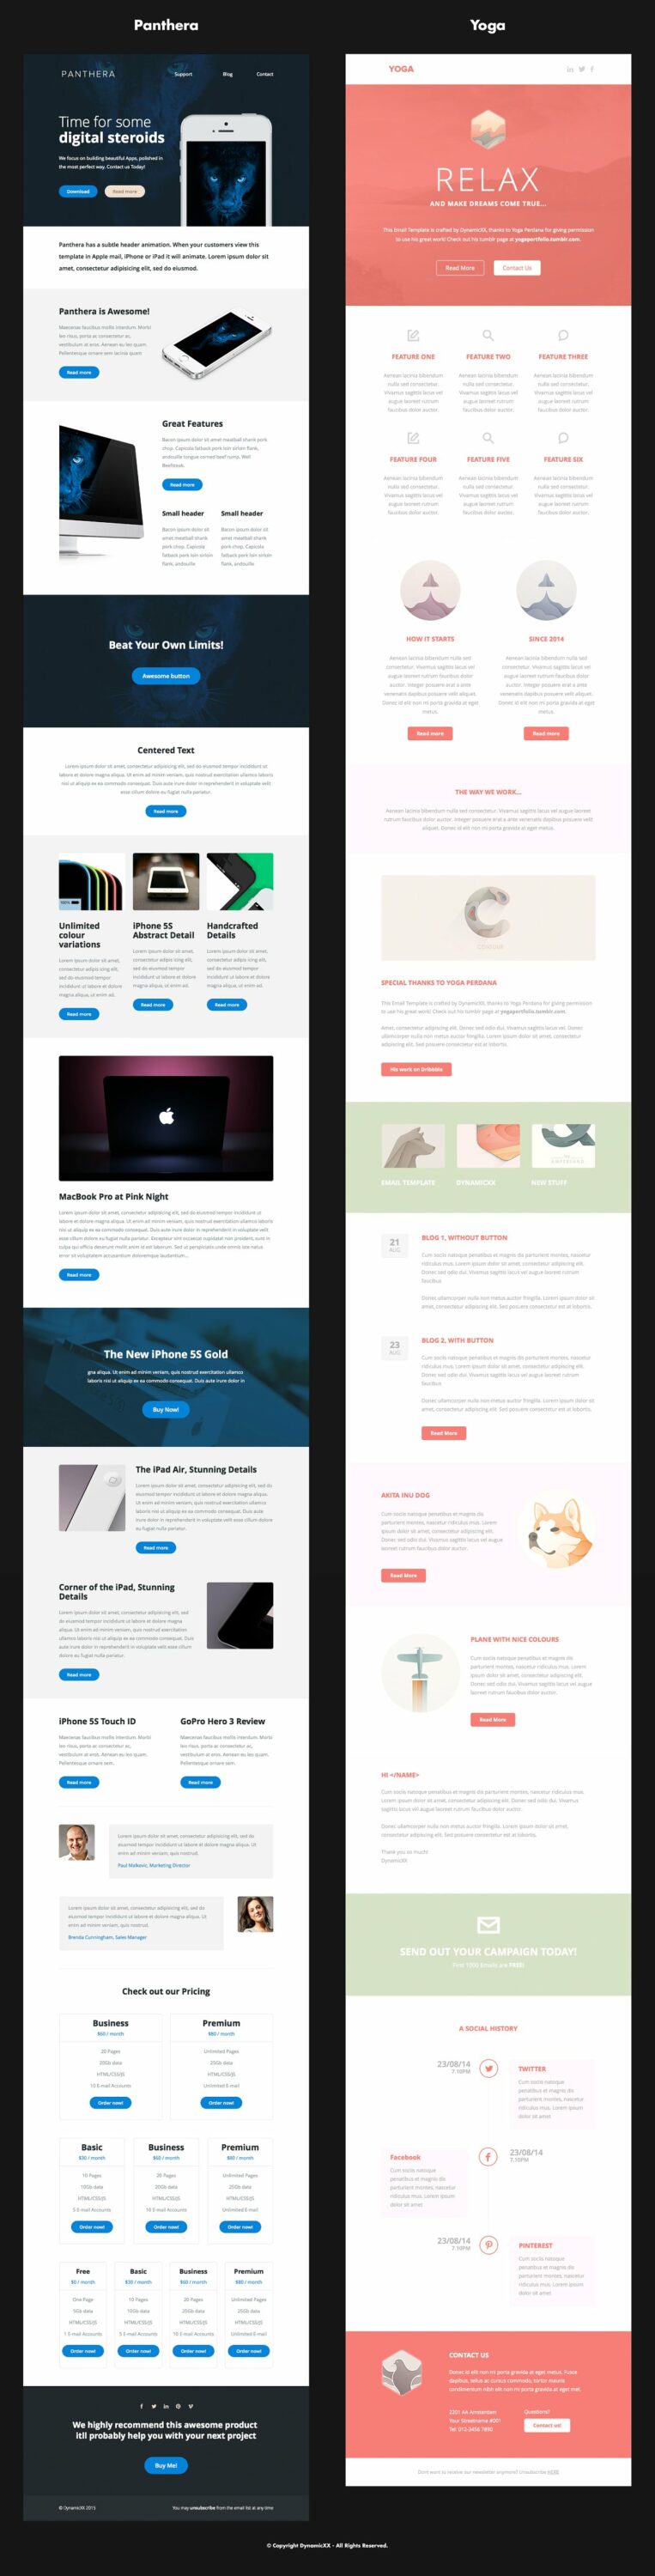 Set of images of marvelous email design templates.